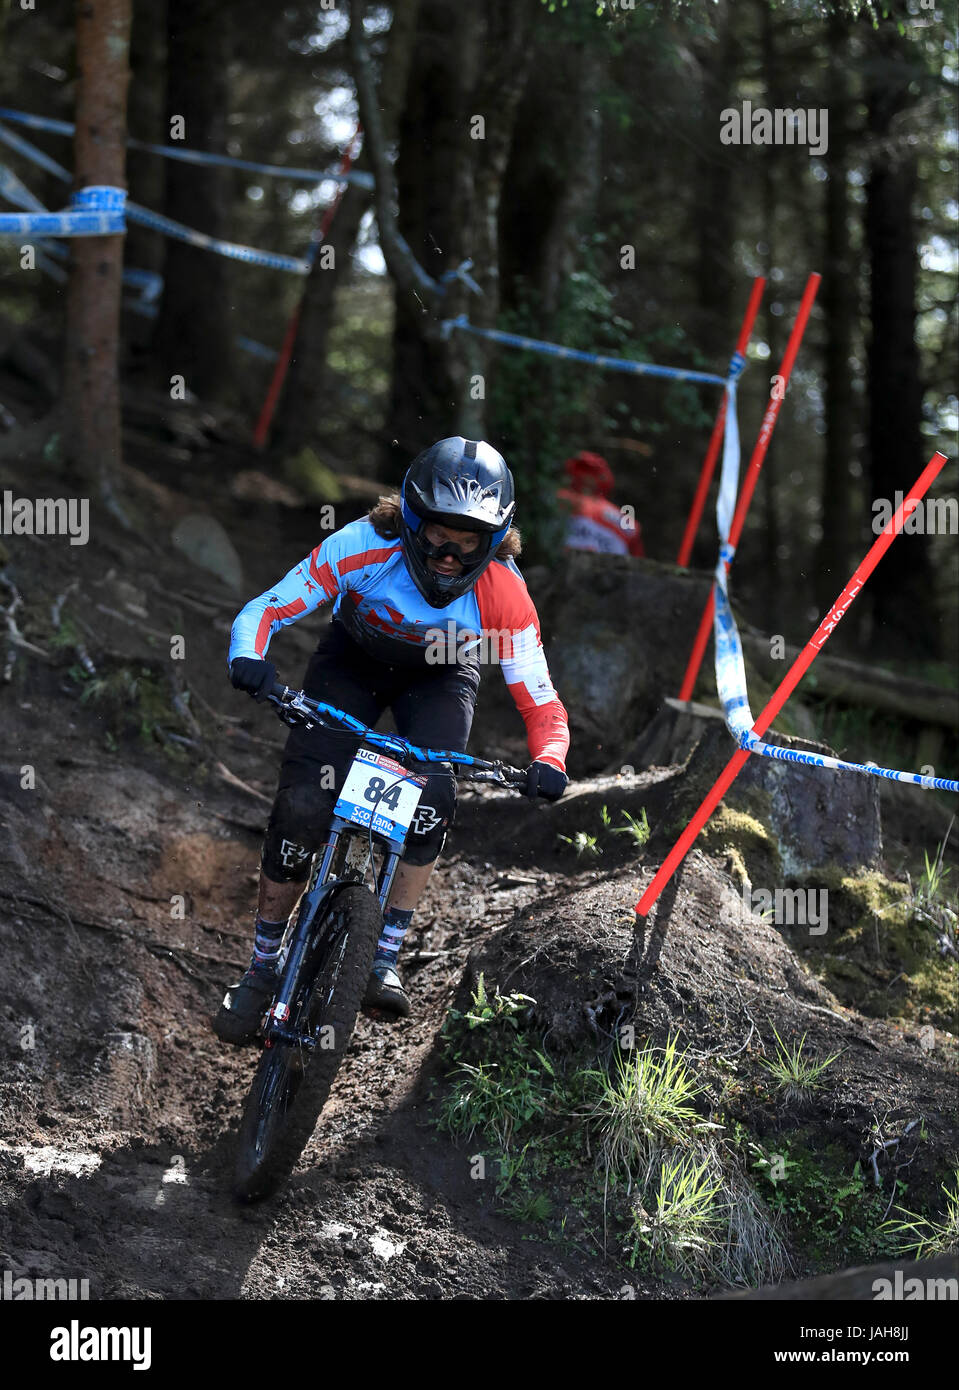 Lutz Weber of NS-Bikes Factory Racing during day one of the 2017 UCI Mountain Bike World Cup at Fort William. PRESS ASSOCIATION Photo. Picture date: Saturday June 3, 2017. Photo credit should read: Tim Goode/PA Wire. RESTRICTIONS: Editorial use only, no commercial use without prior permission Stock Photo